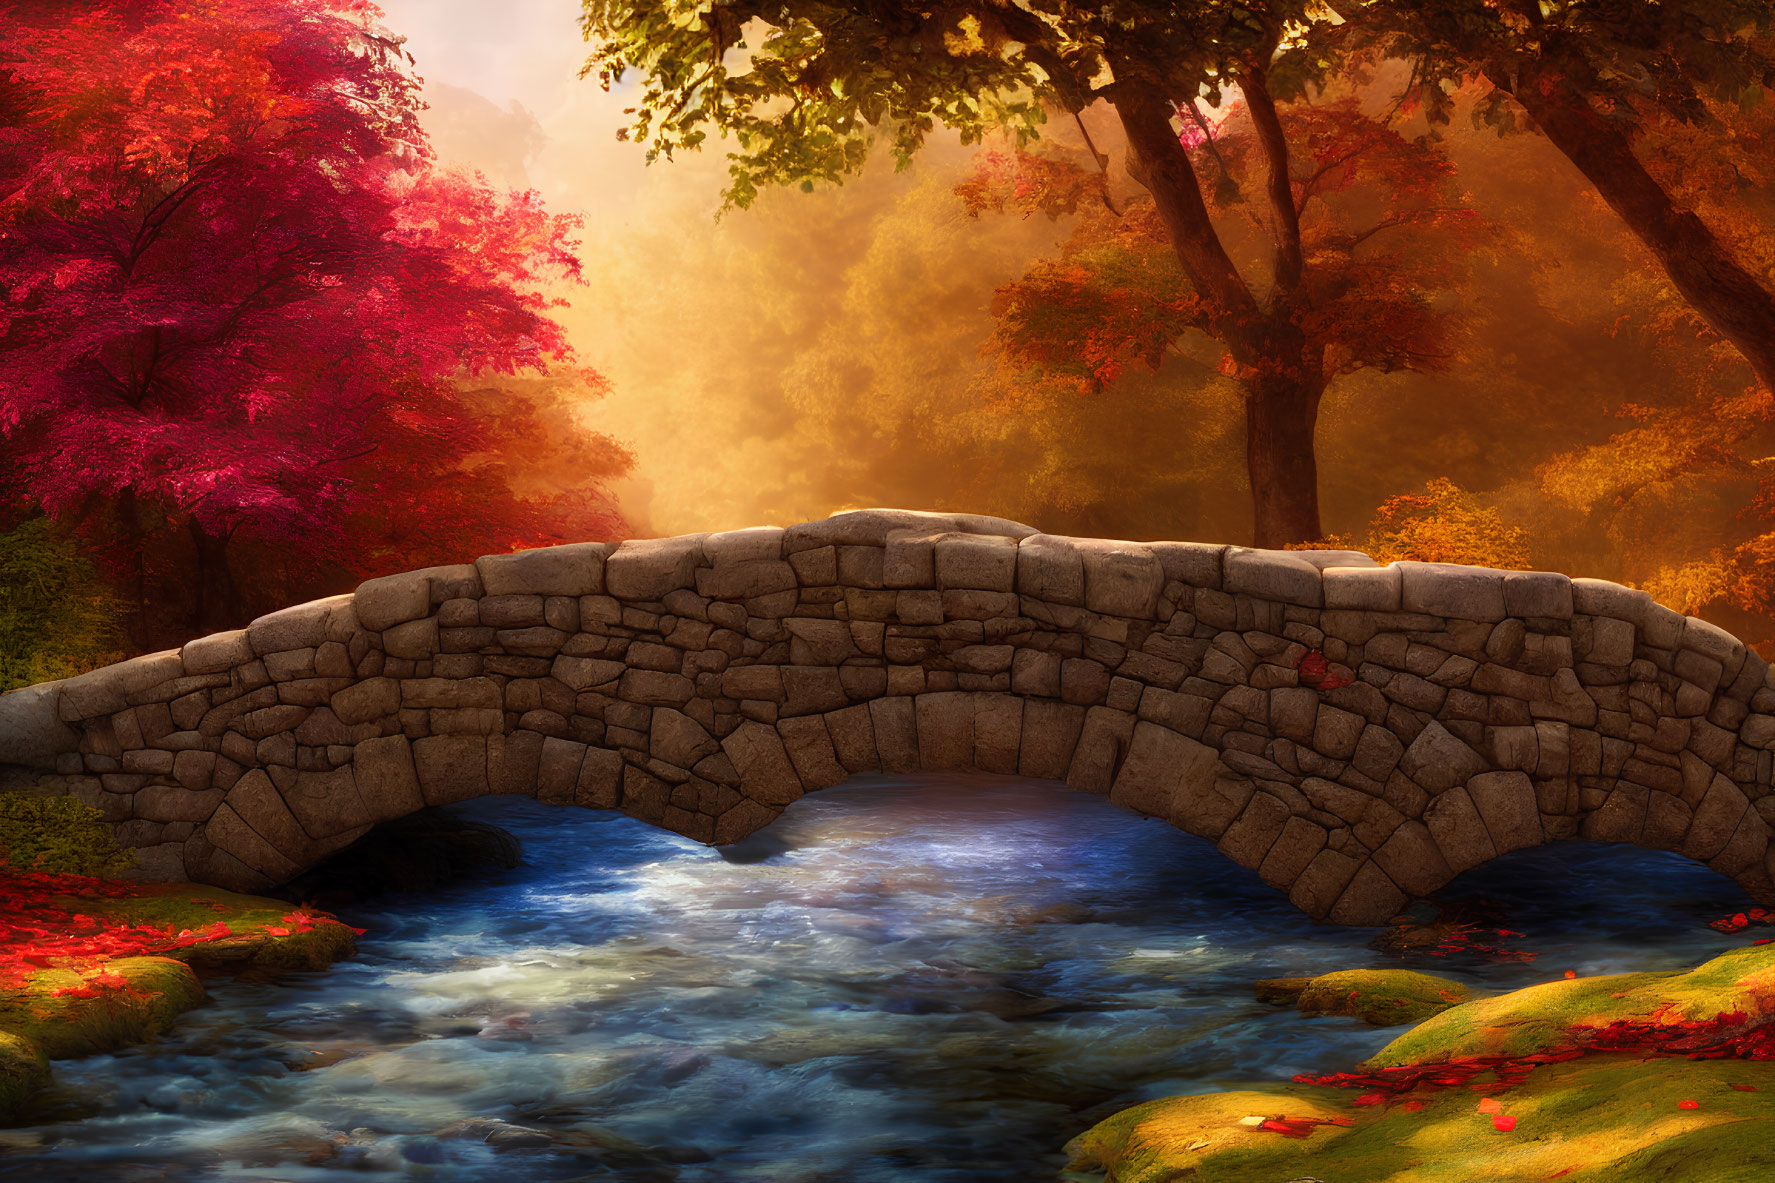 Stone bridge over clear stream surrounded by lush greenery and autumn trees in golden sunlight